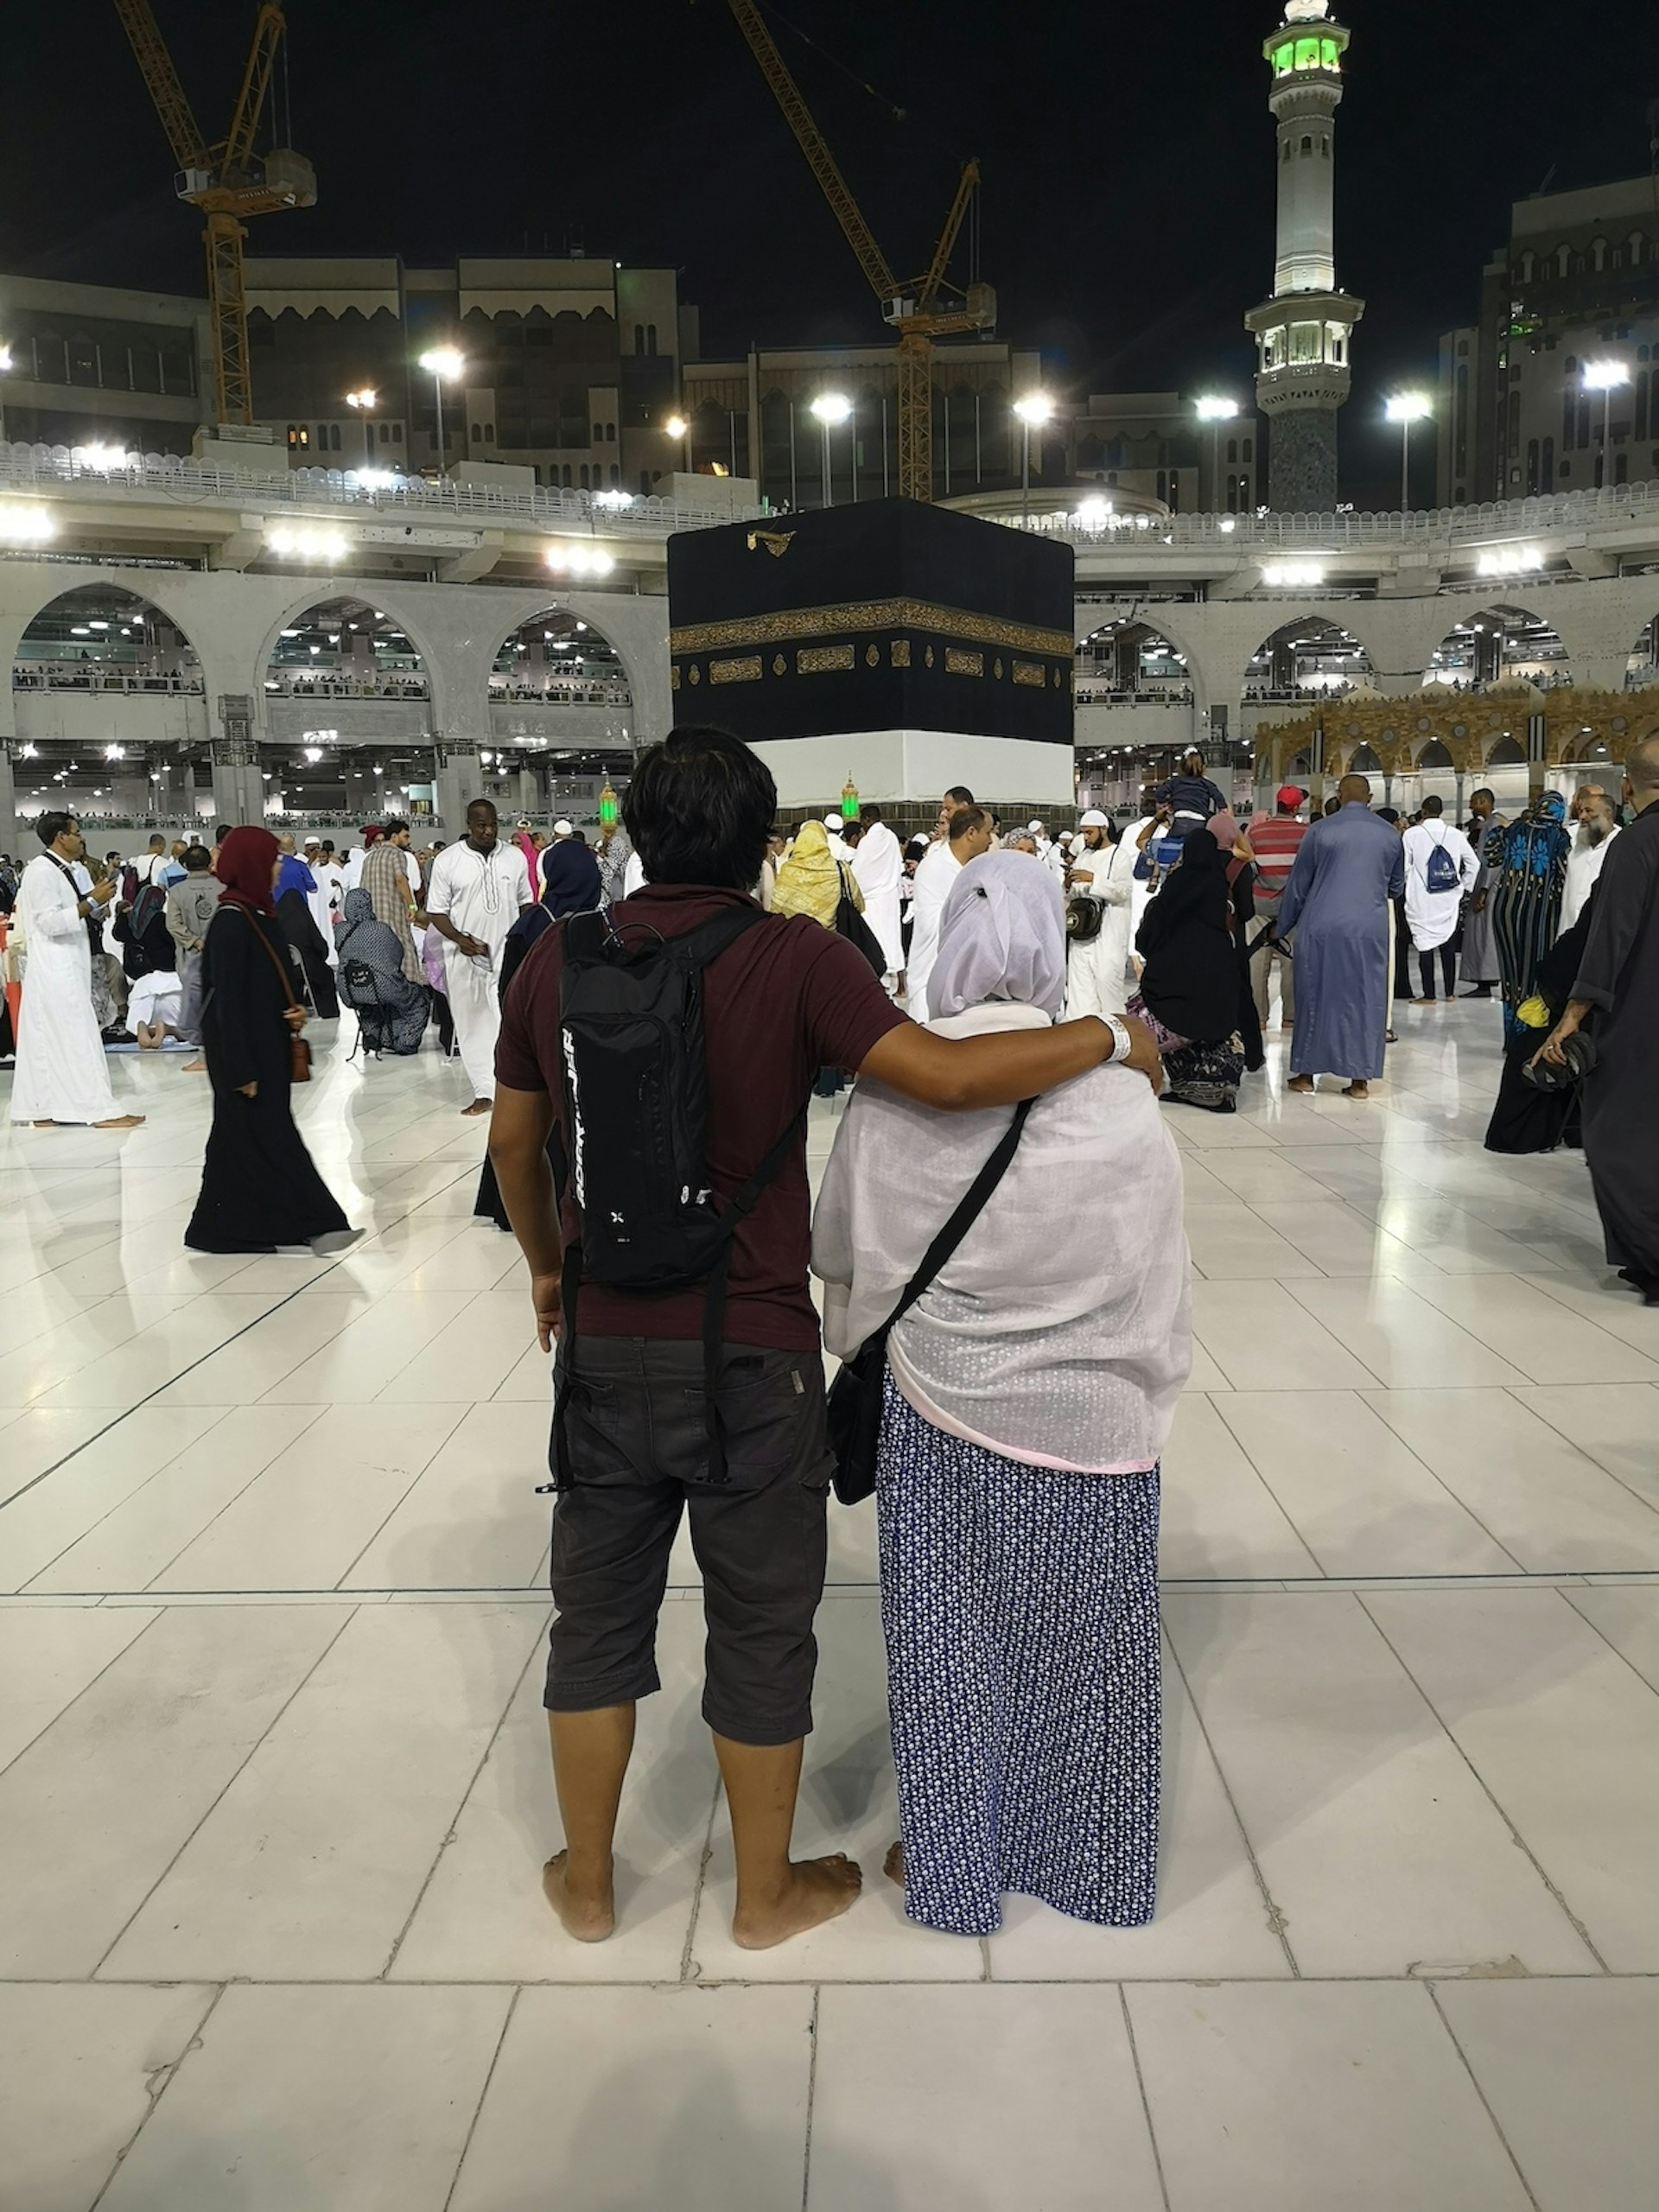 Tharik and his mother stand facing away from the camera and looking towards the Kaaba at the centre of the image. Tharik's arm is around his mother's shoulder. Hajj diaries